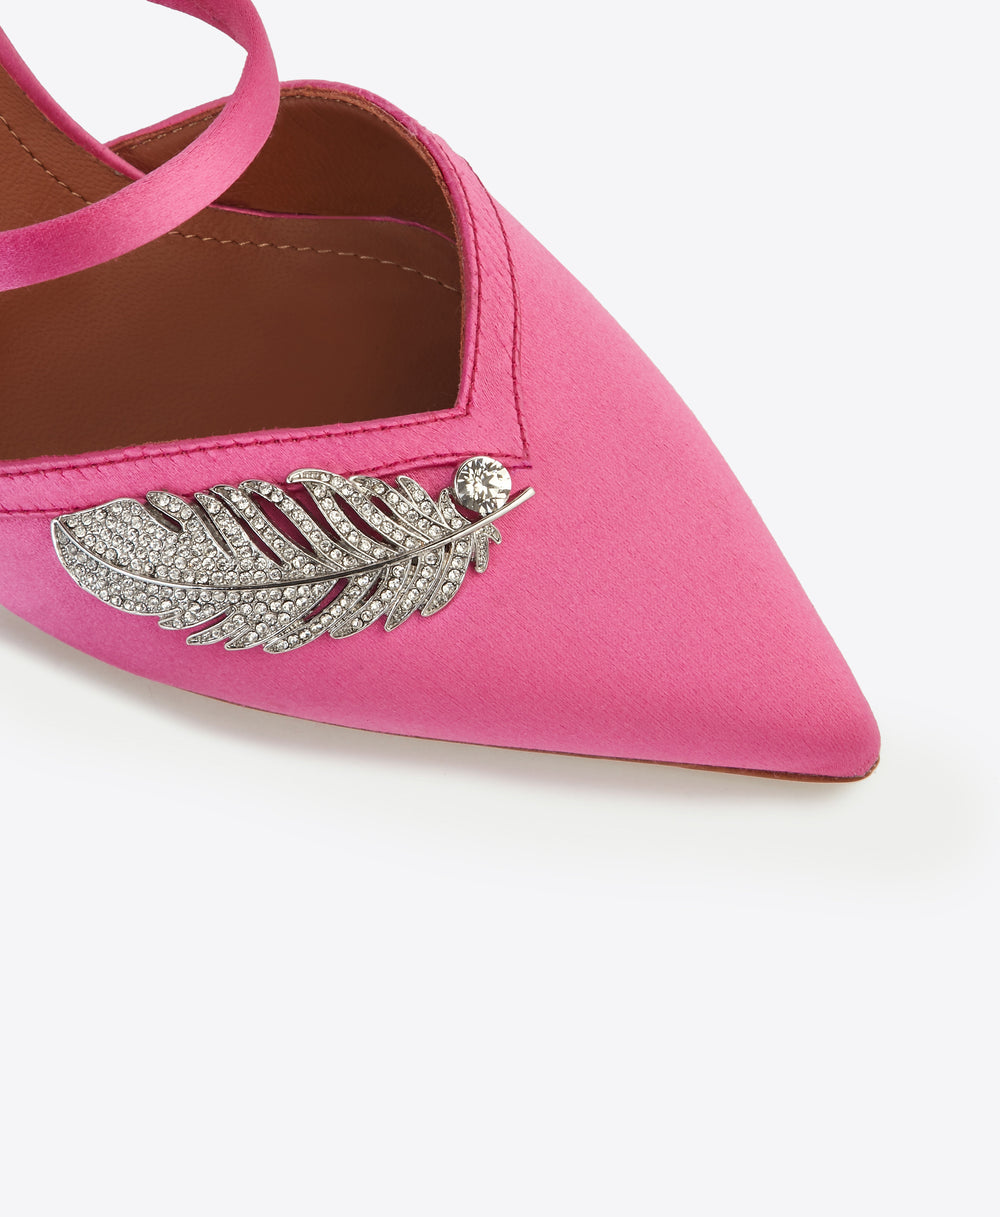 Women's Pink Satin Embellished Stiletto Mules Malone Souliers